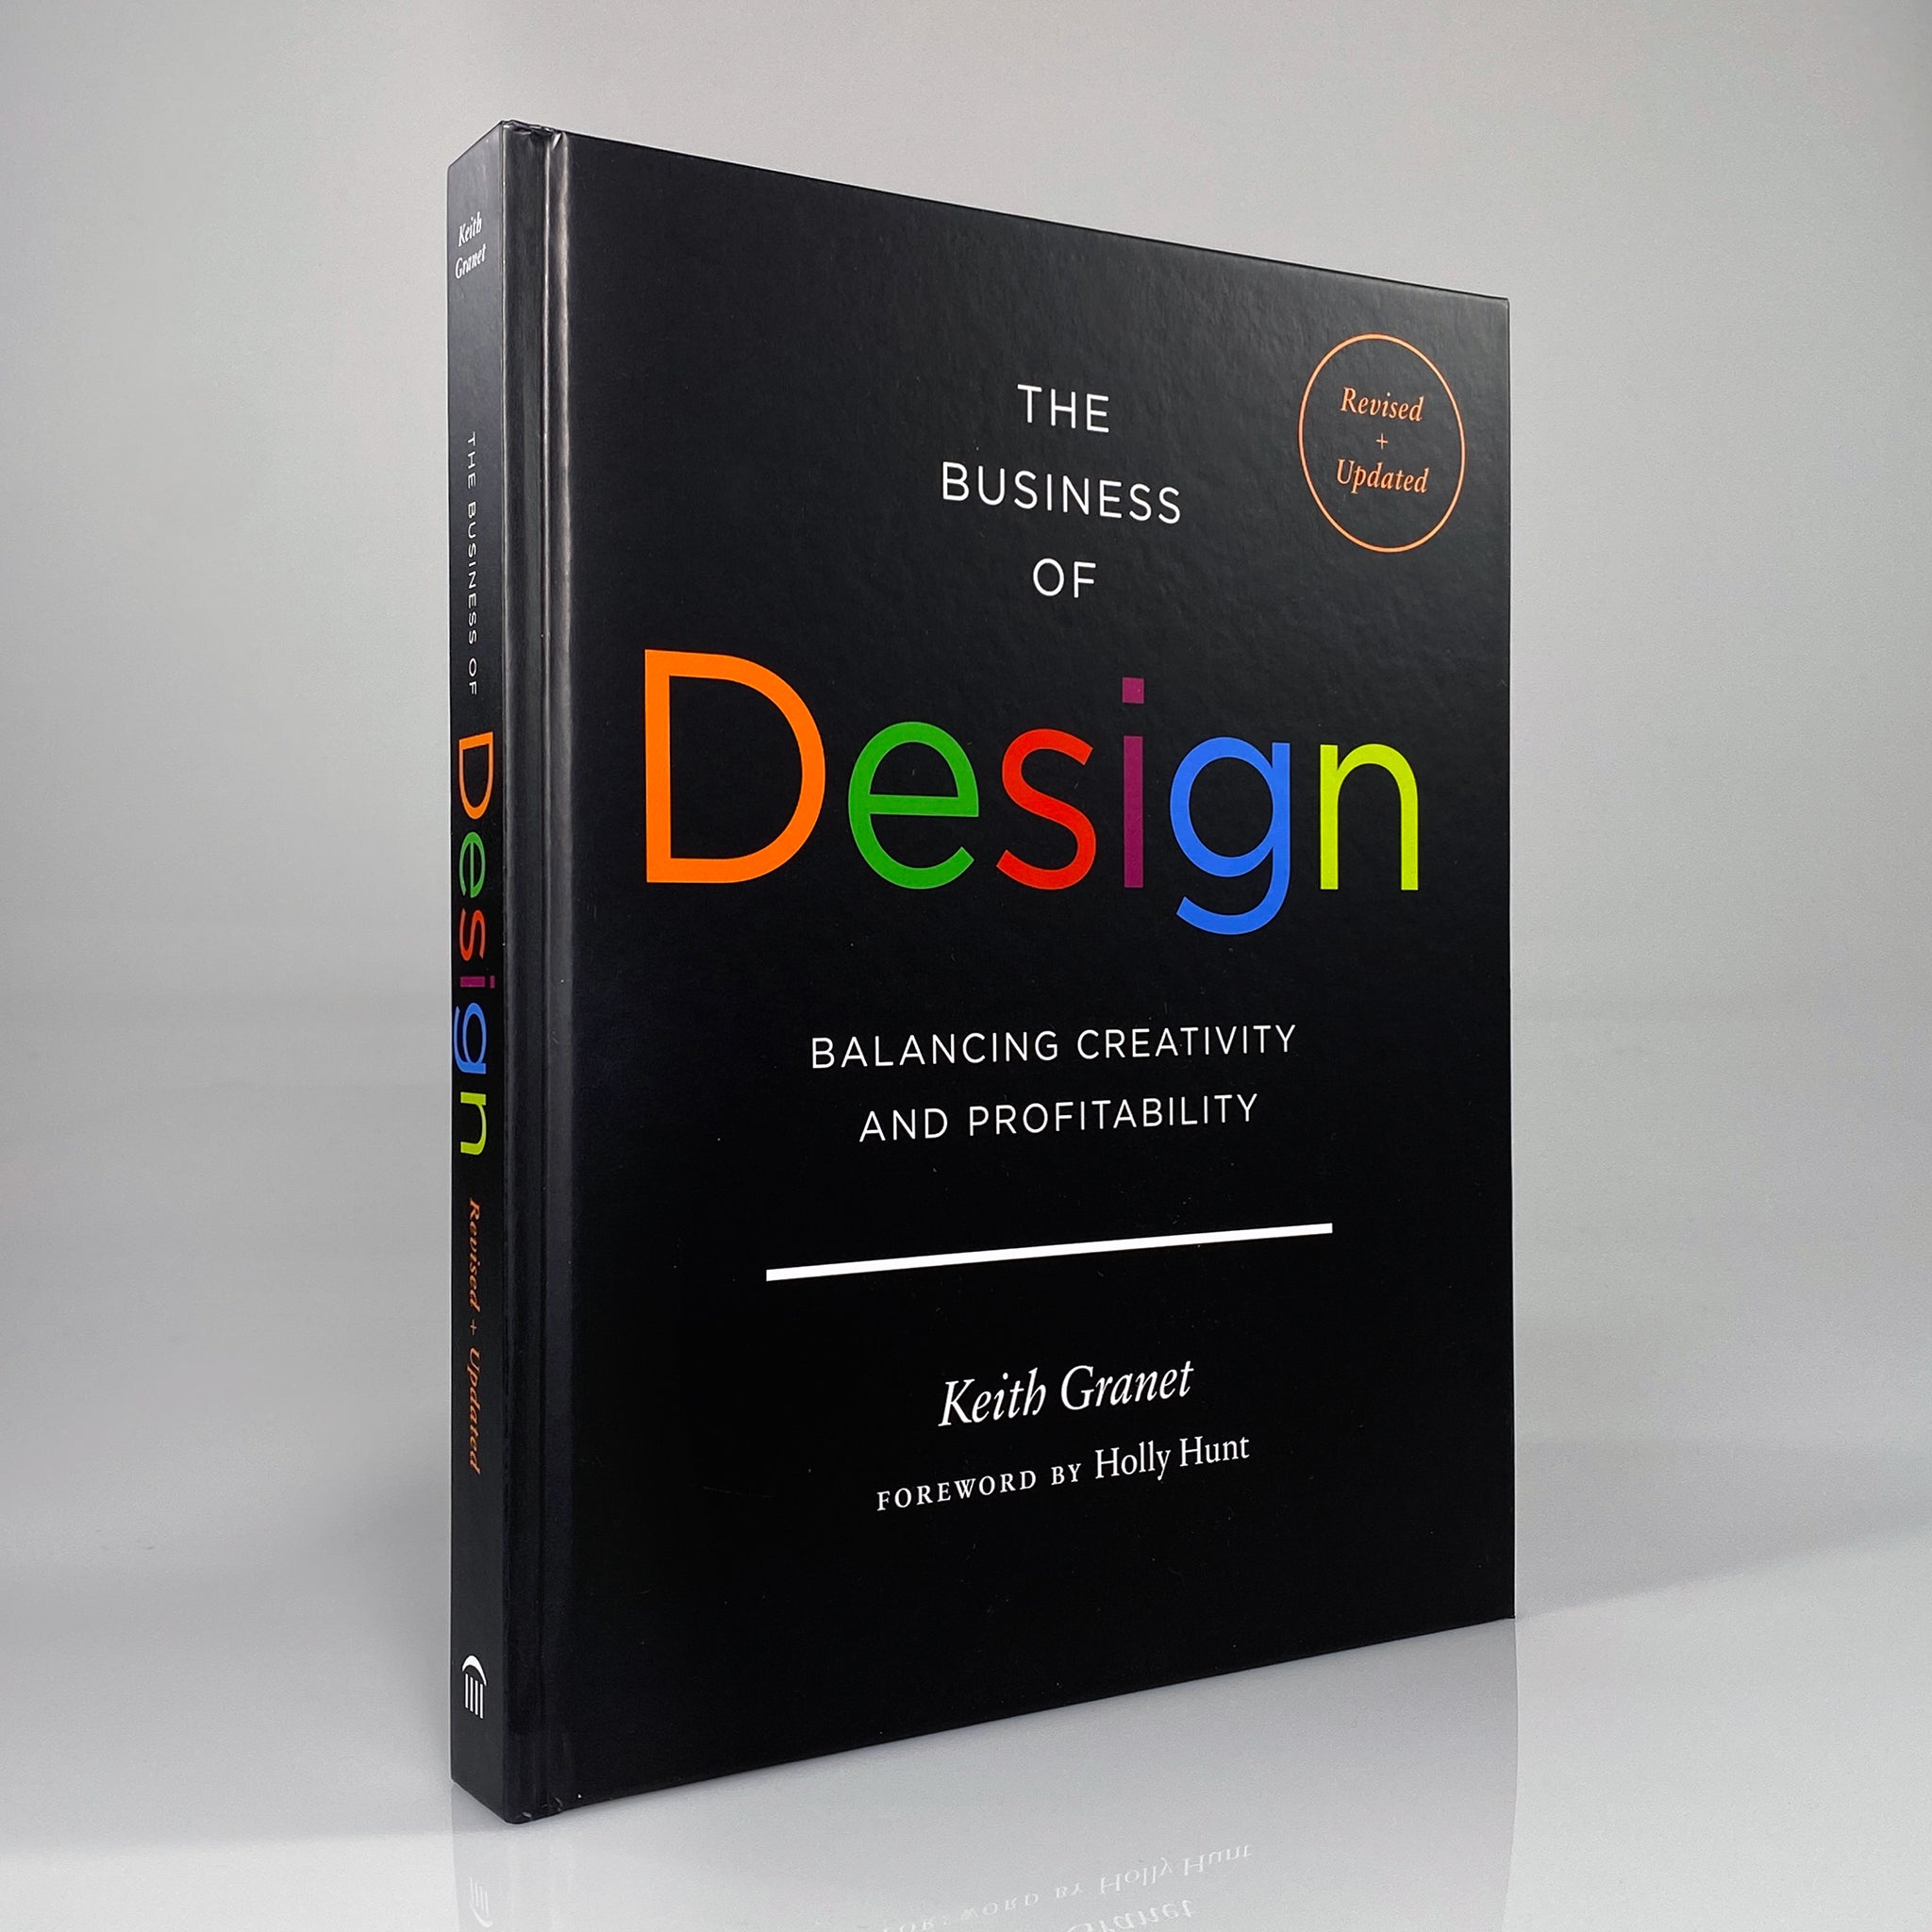 The Business of Design: Balancing Creativity and Profitability